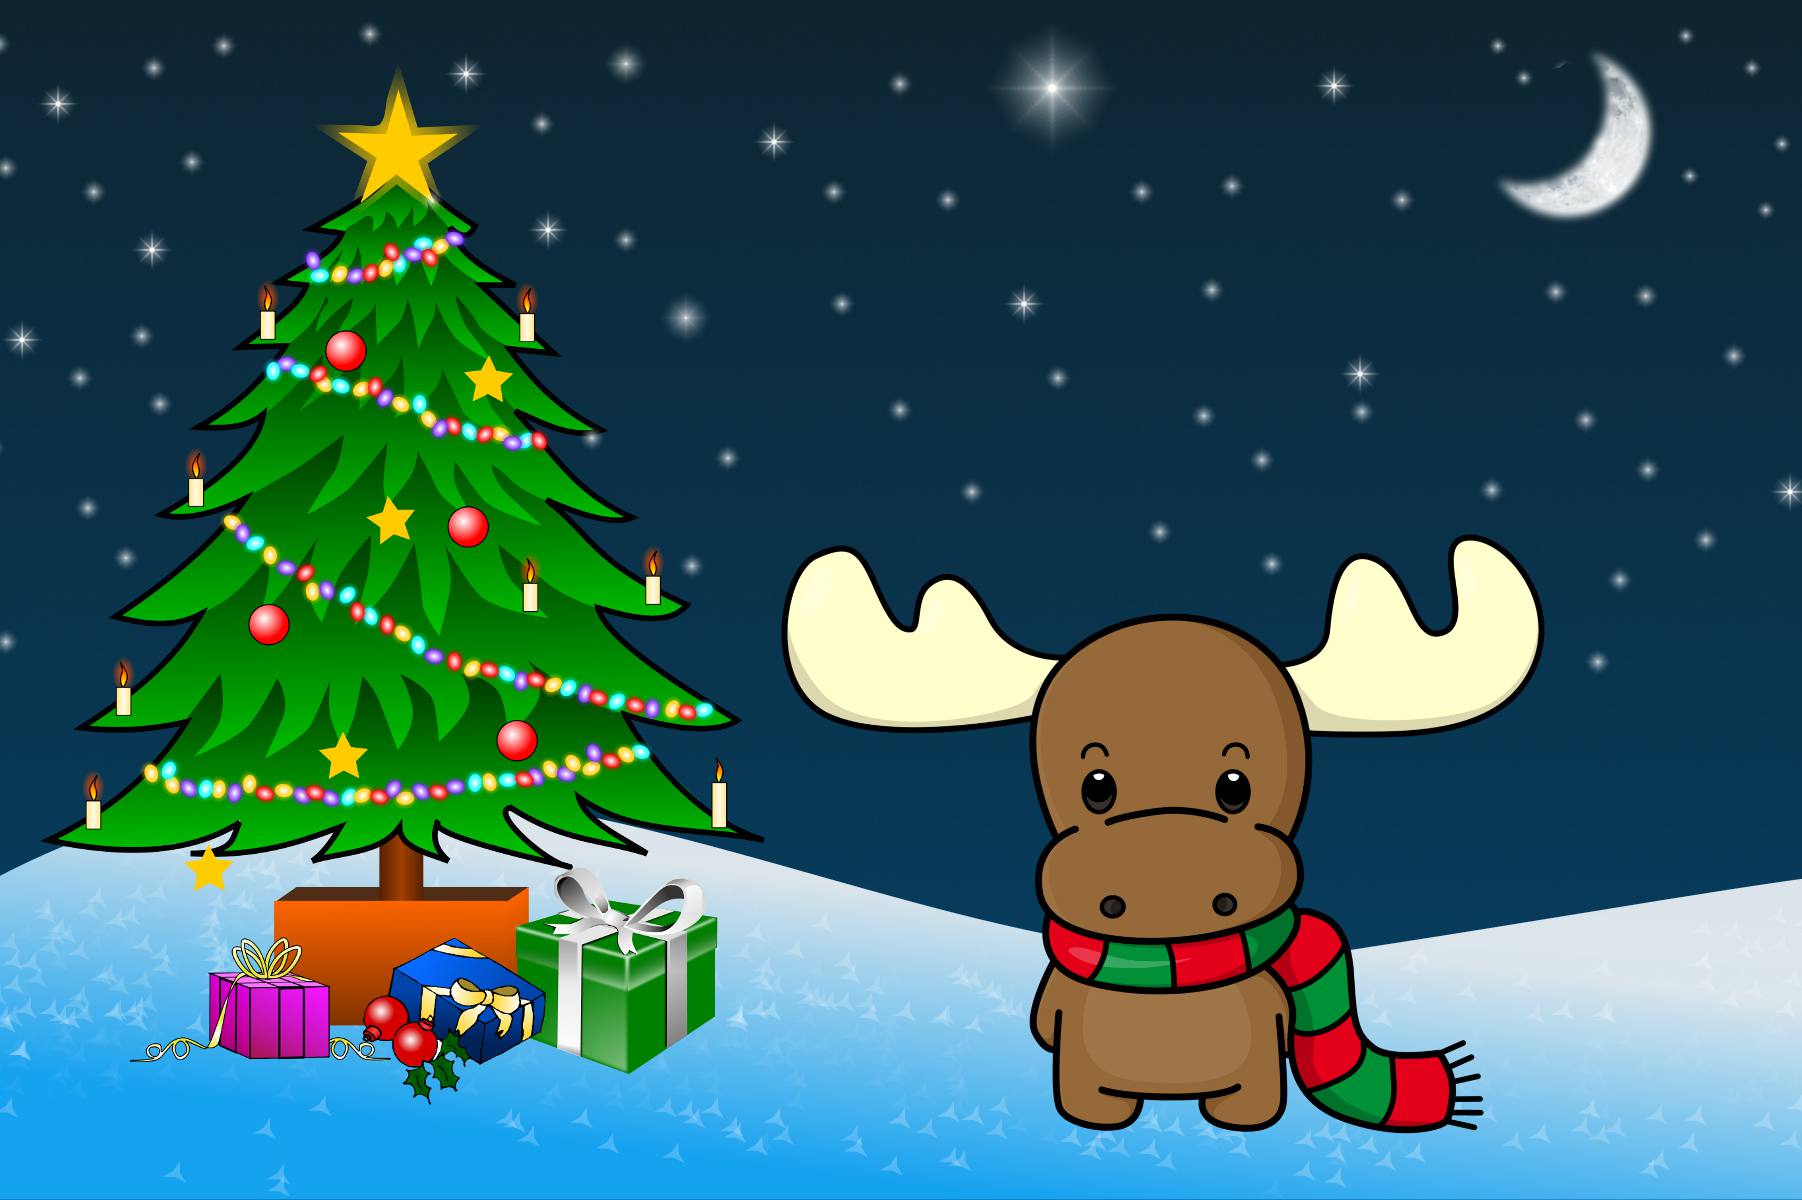 Christmas Desktop Wallpapers for Mac, Windows, and Linux